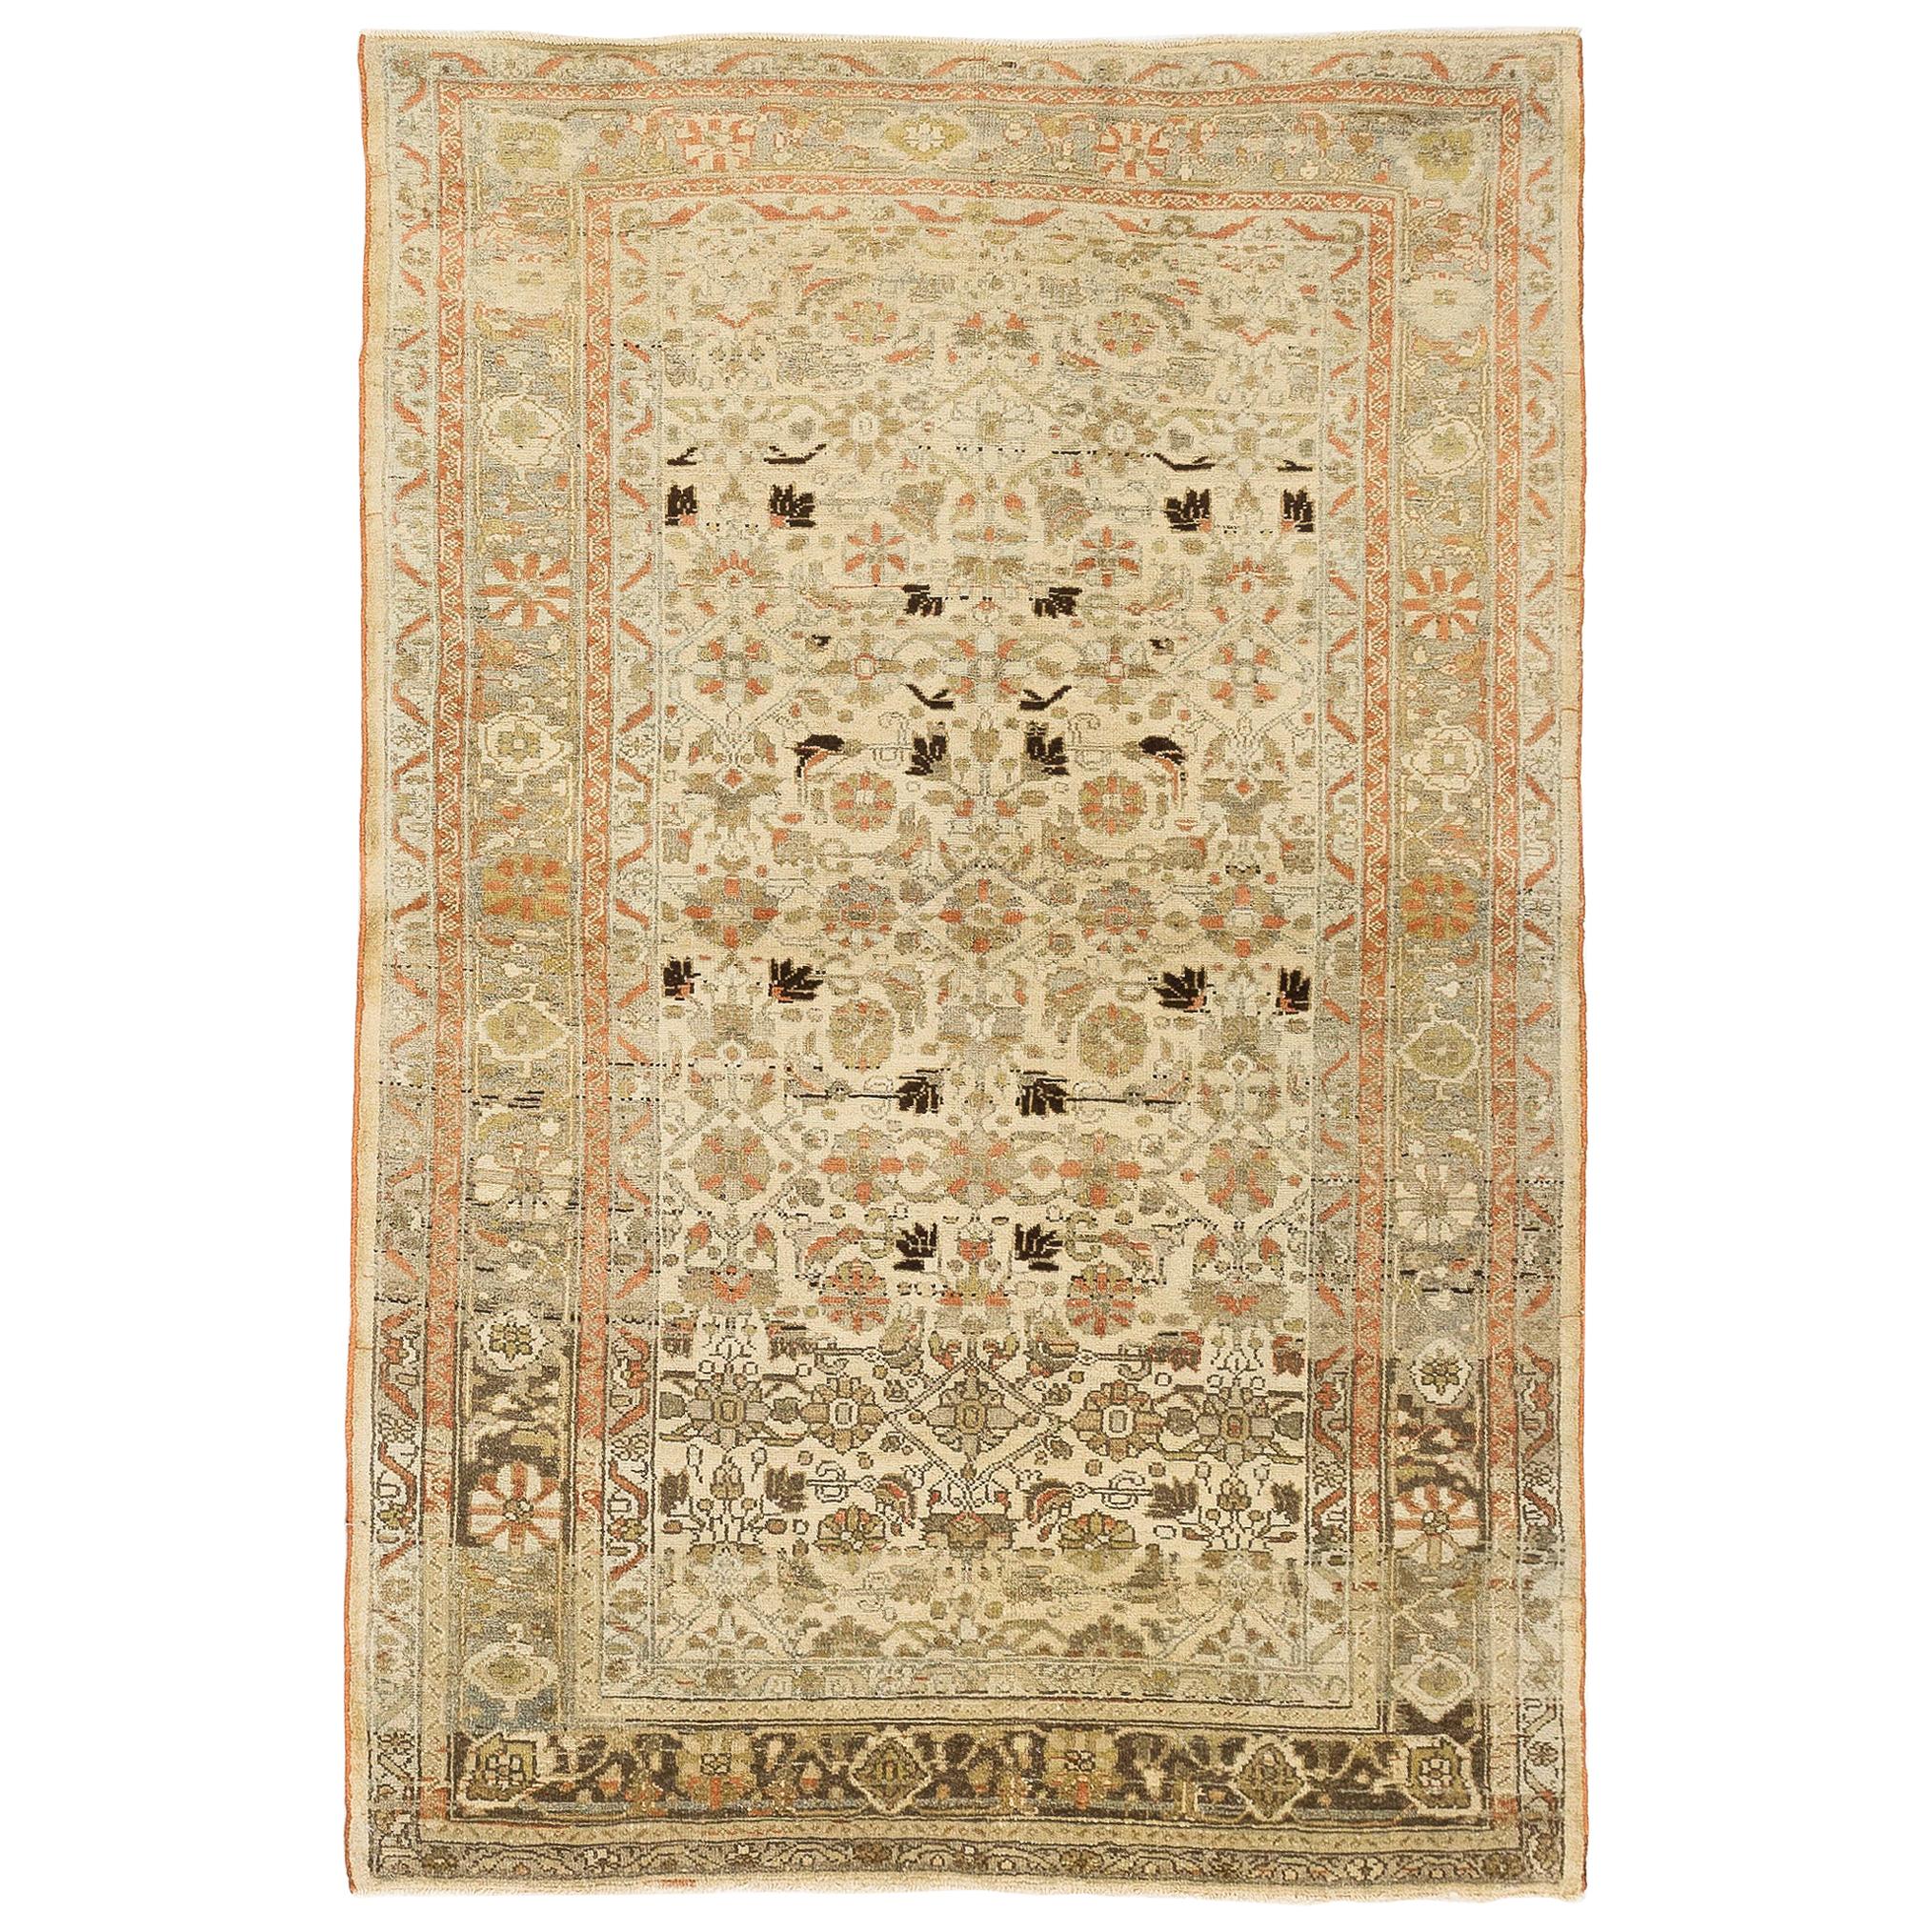 Antique Persian Malayer Rug with Black and Green Flower Details on Ivory Field